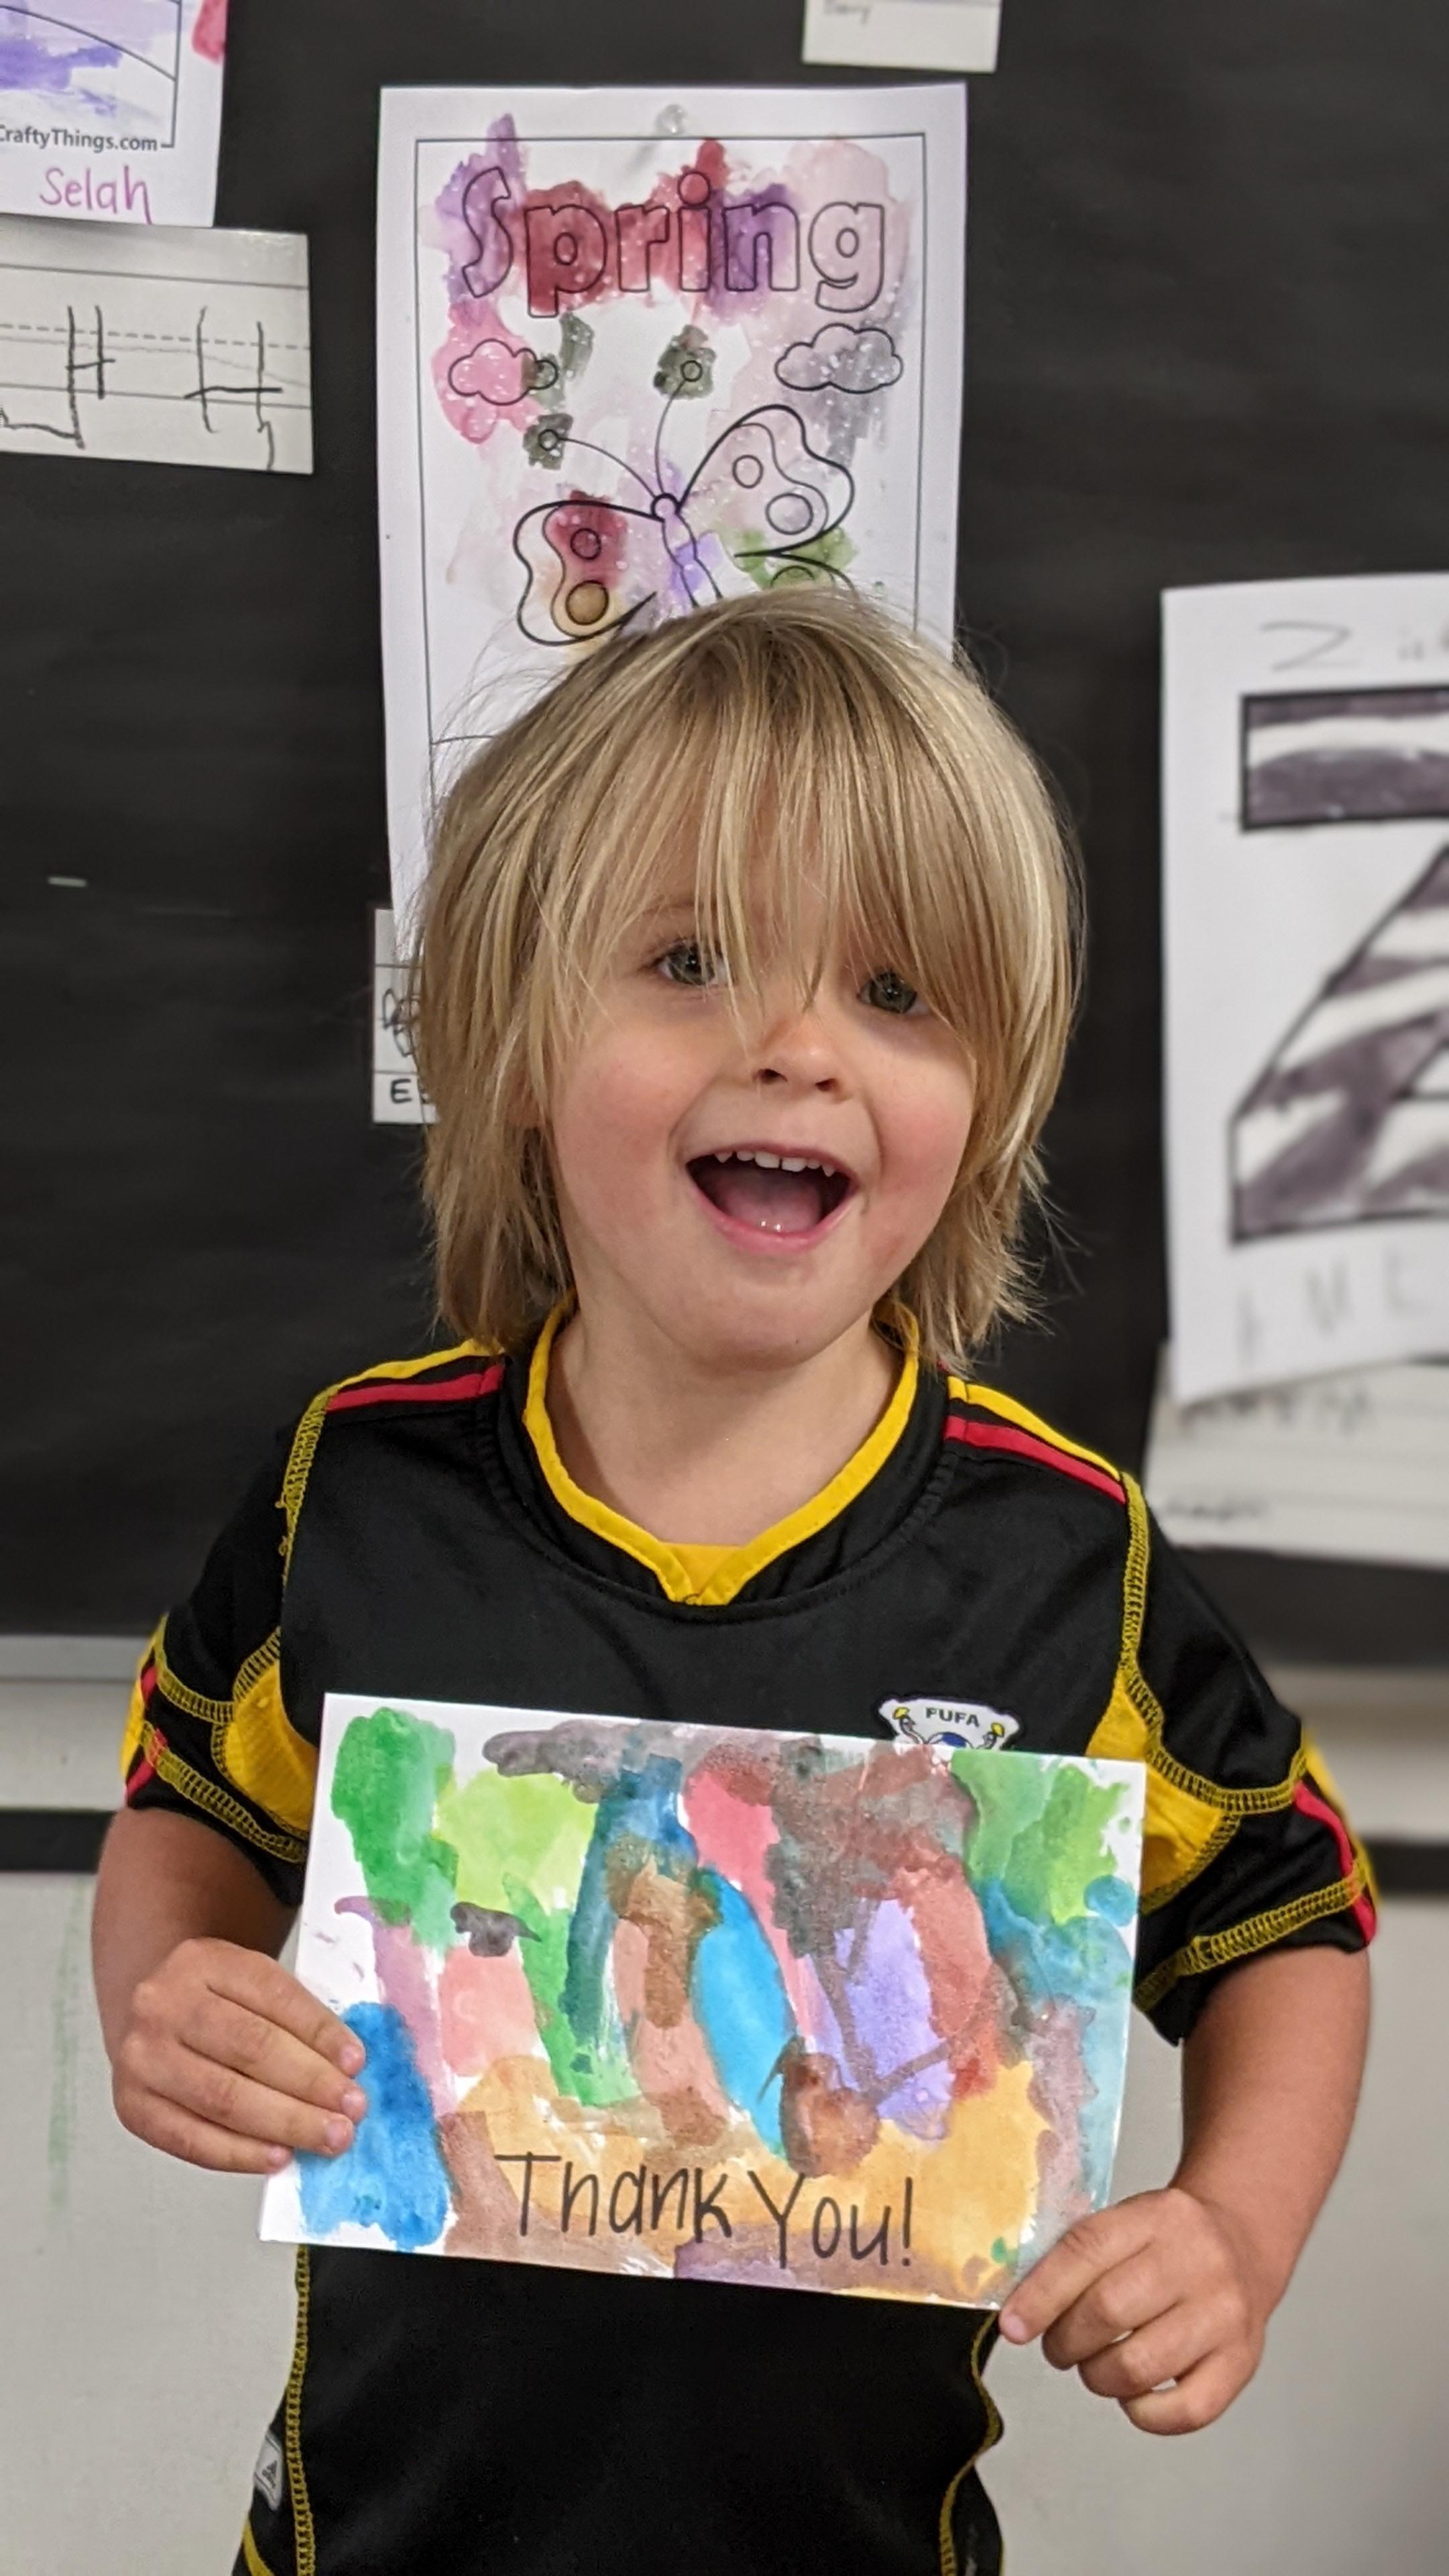 preschooler with thank you card to first responder